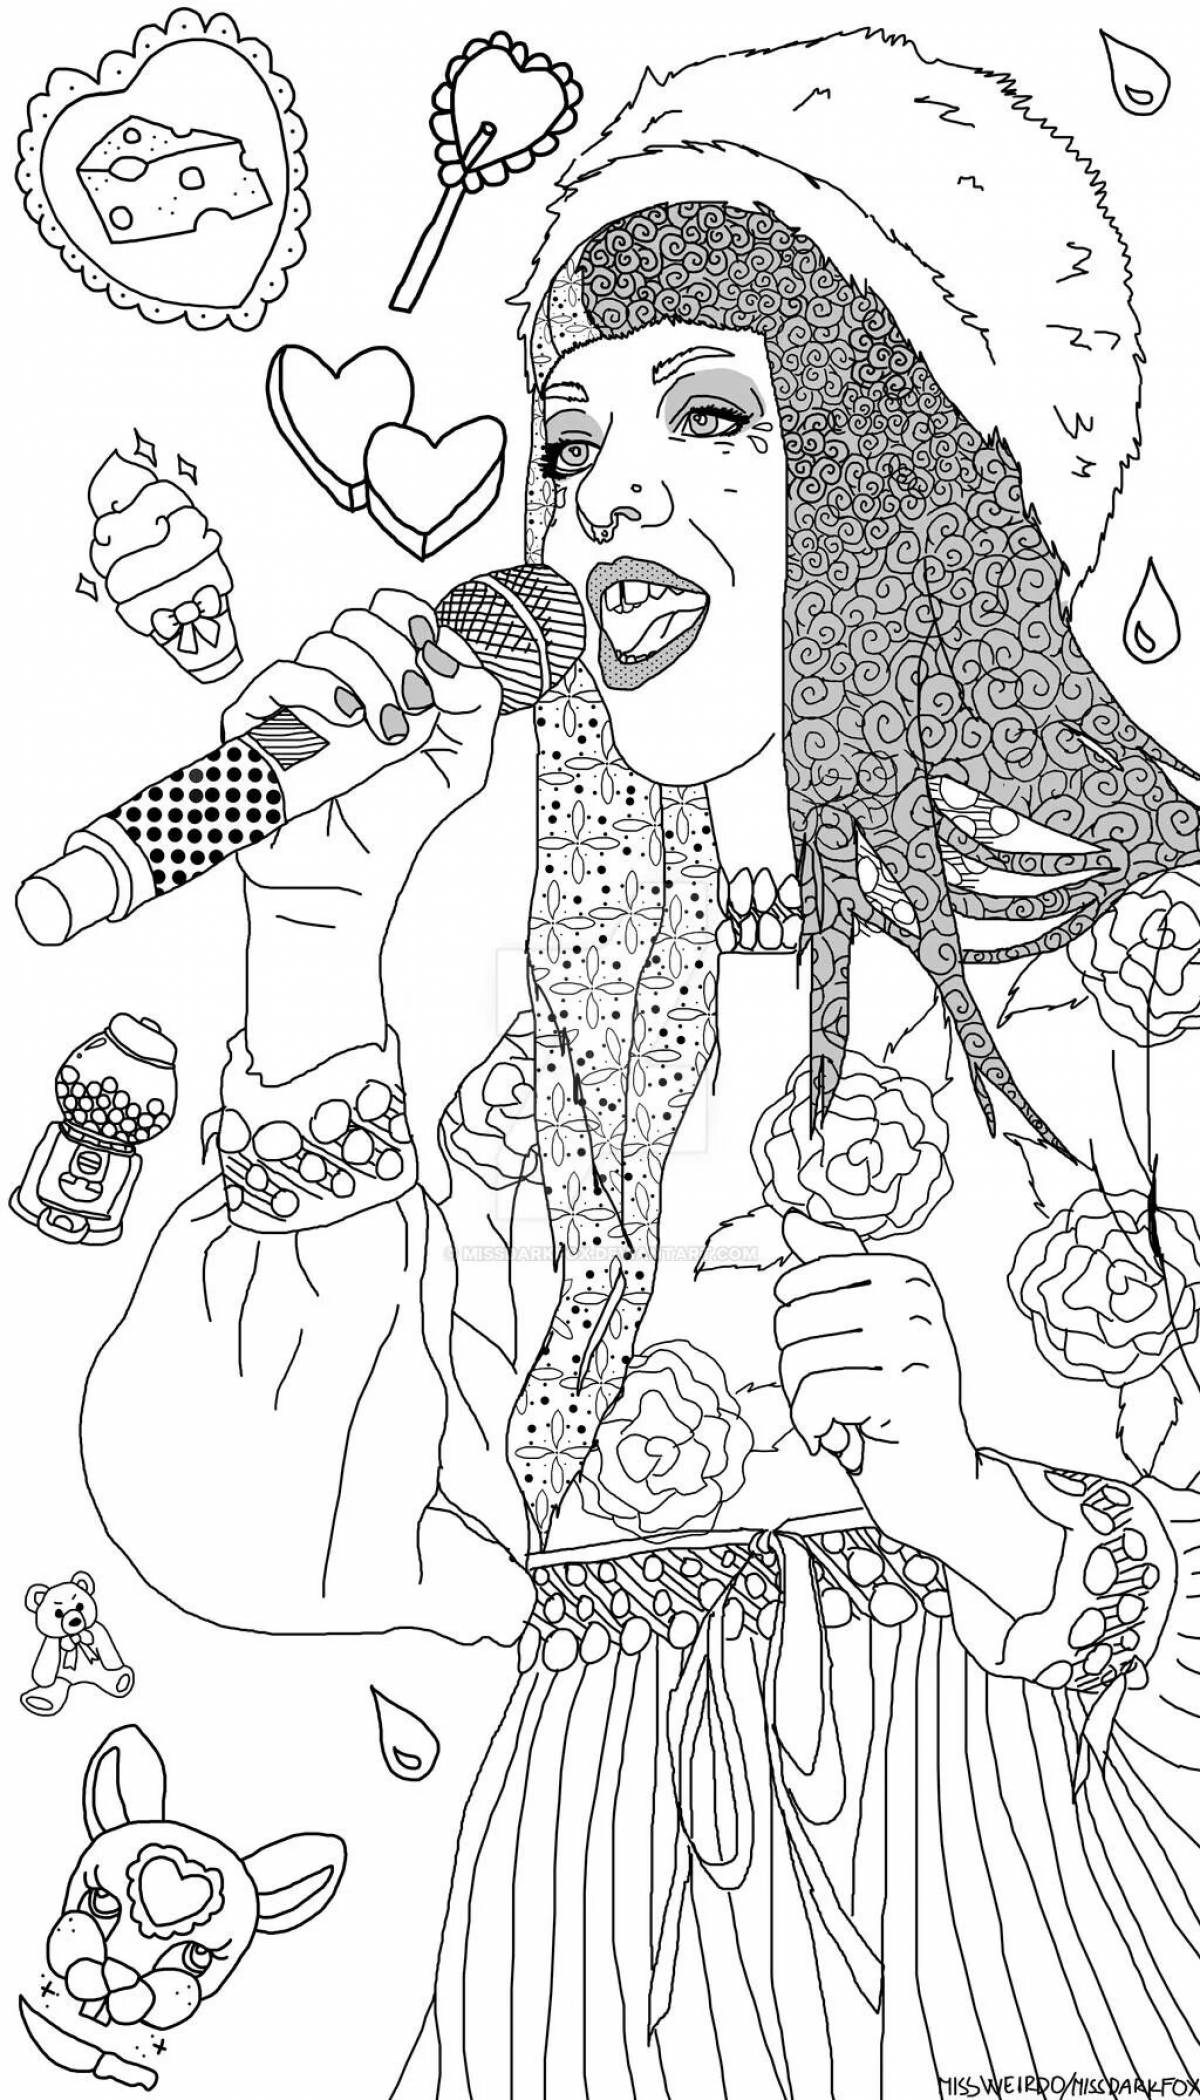 Exciting crybaby coloring book